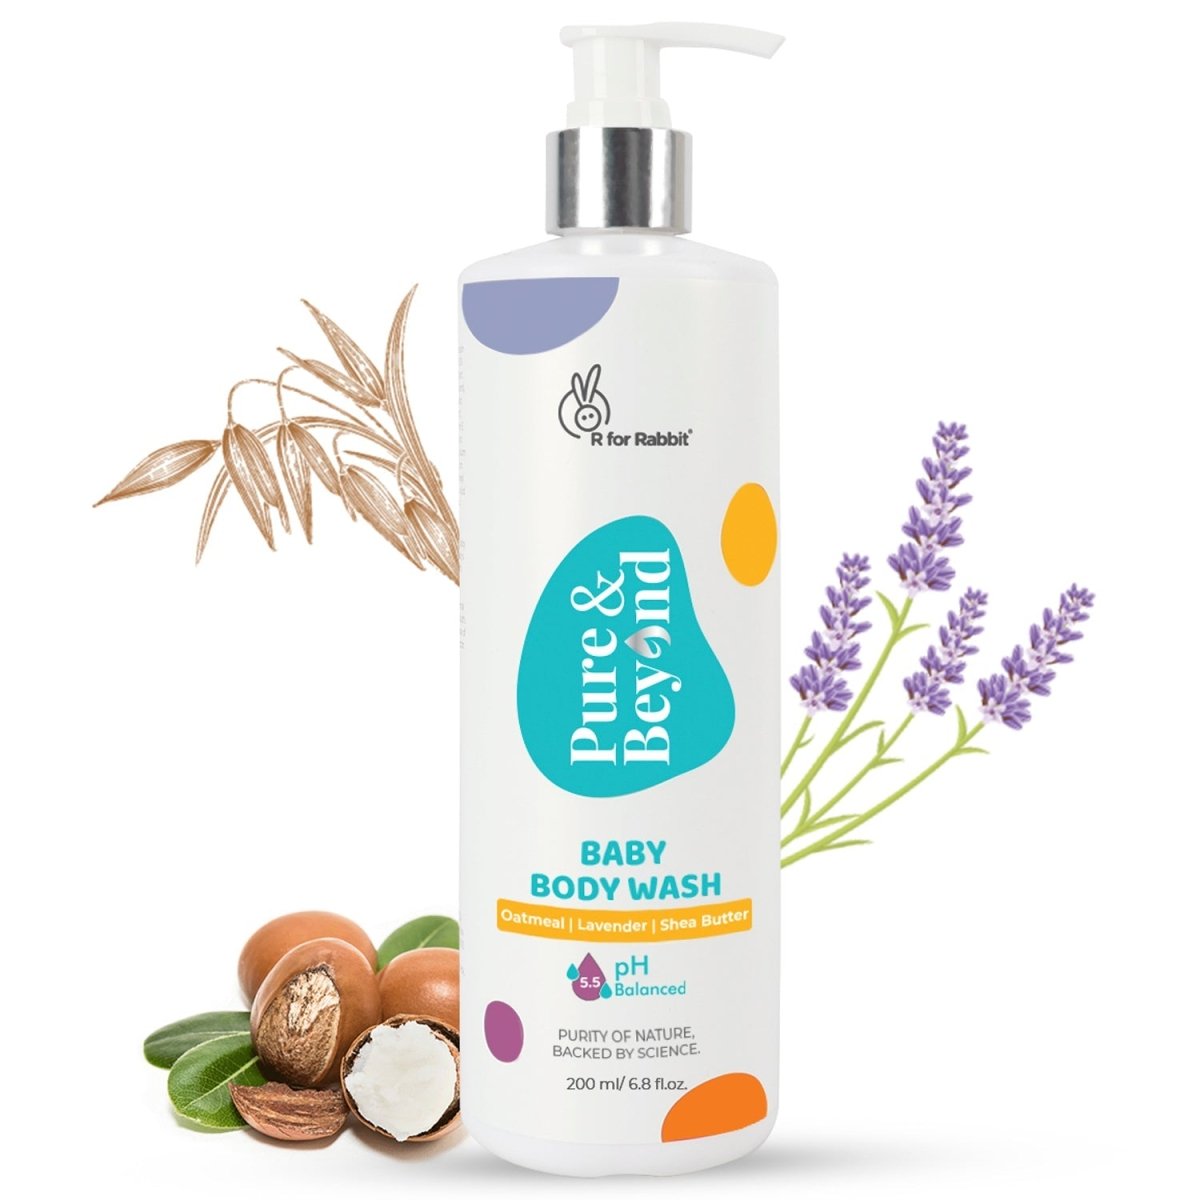 R For Rabbit Pure & Beyond Baby Head to Toe Wash - Oatmeal | 400 ml - BWHTOM4001